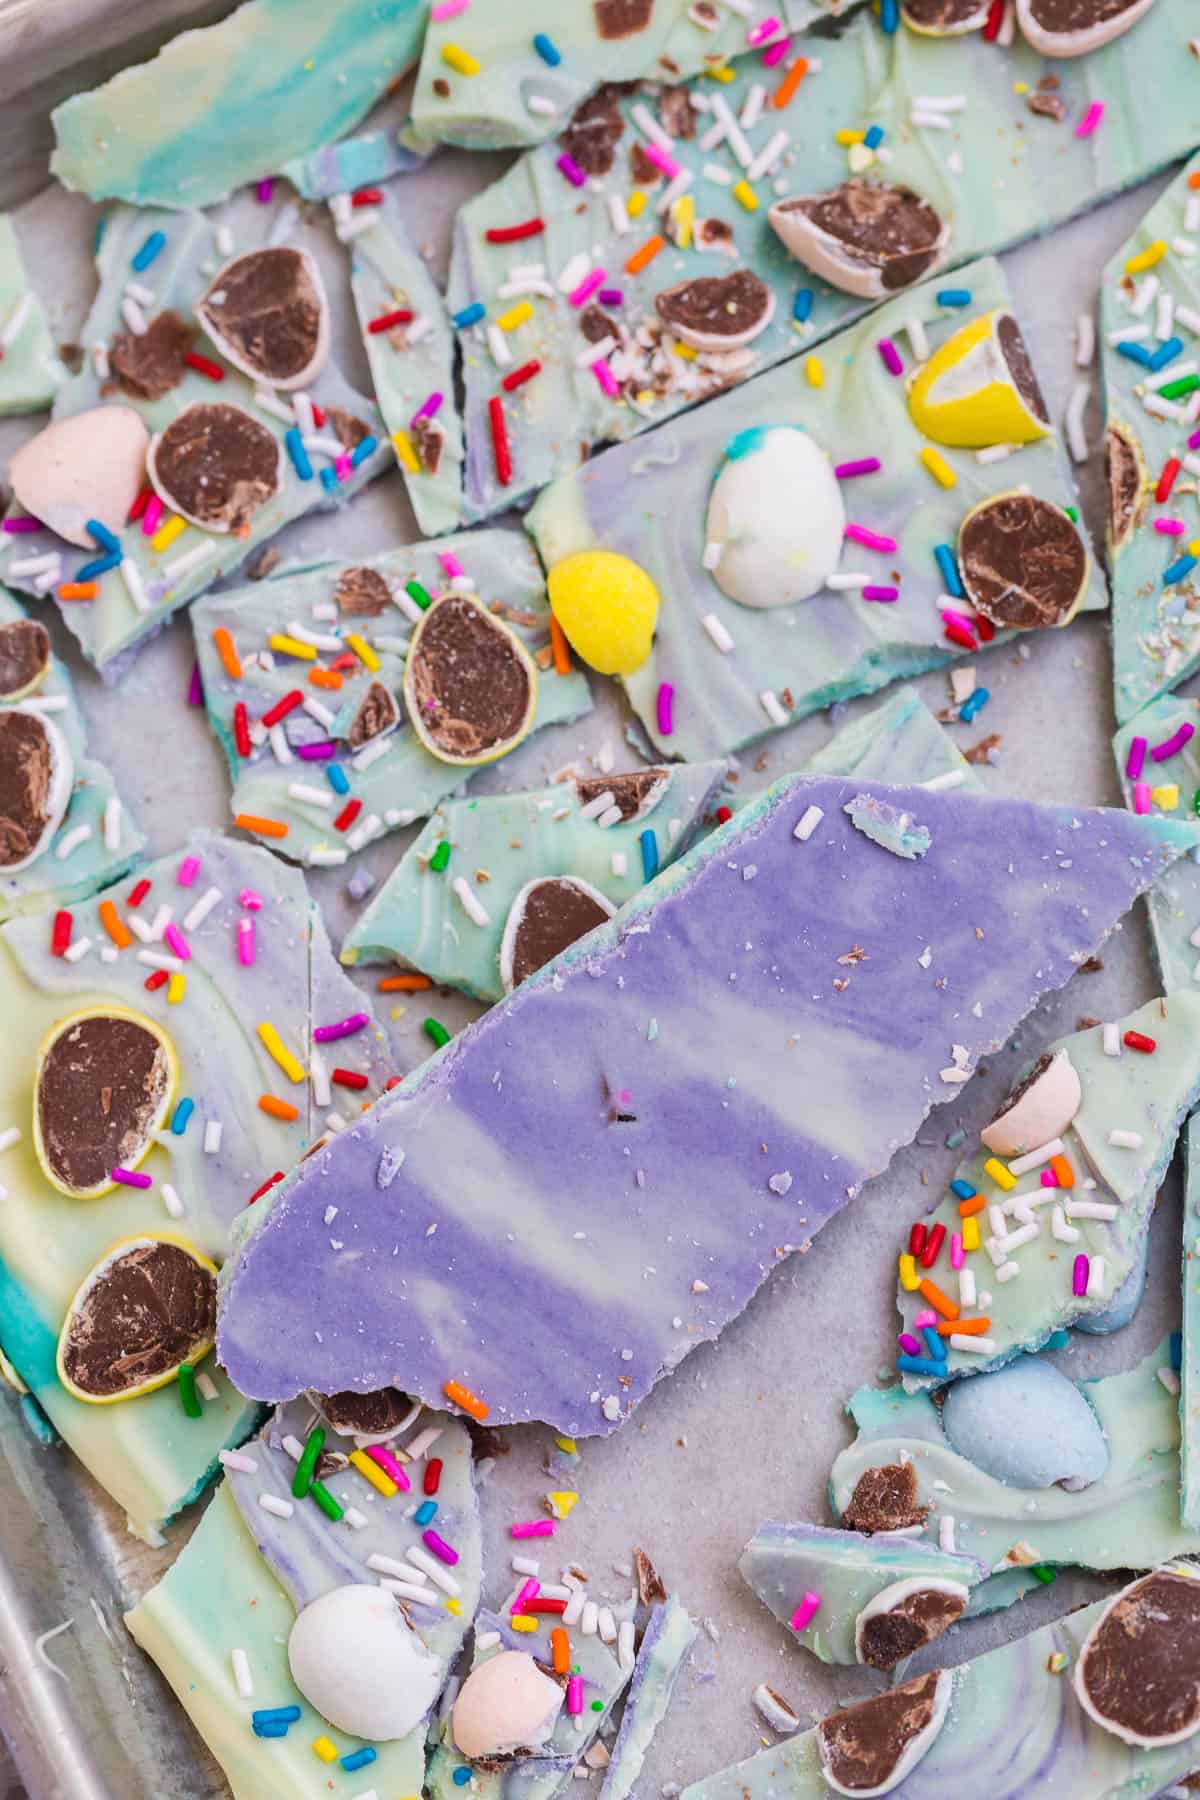 underside of white chocolate bark colored with purple and blue